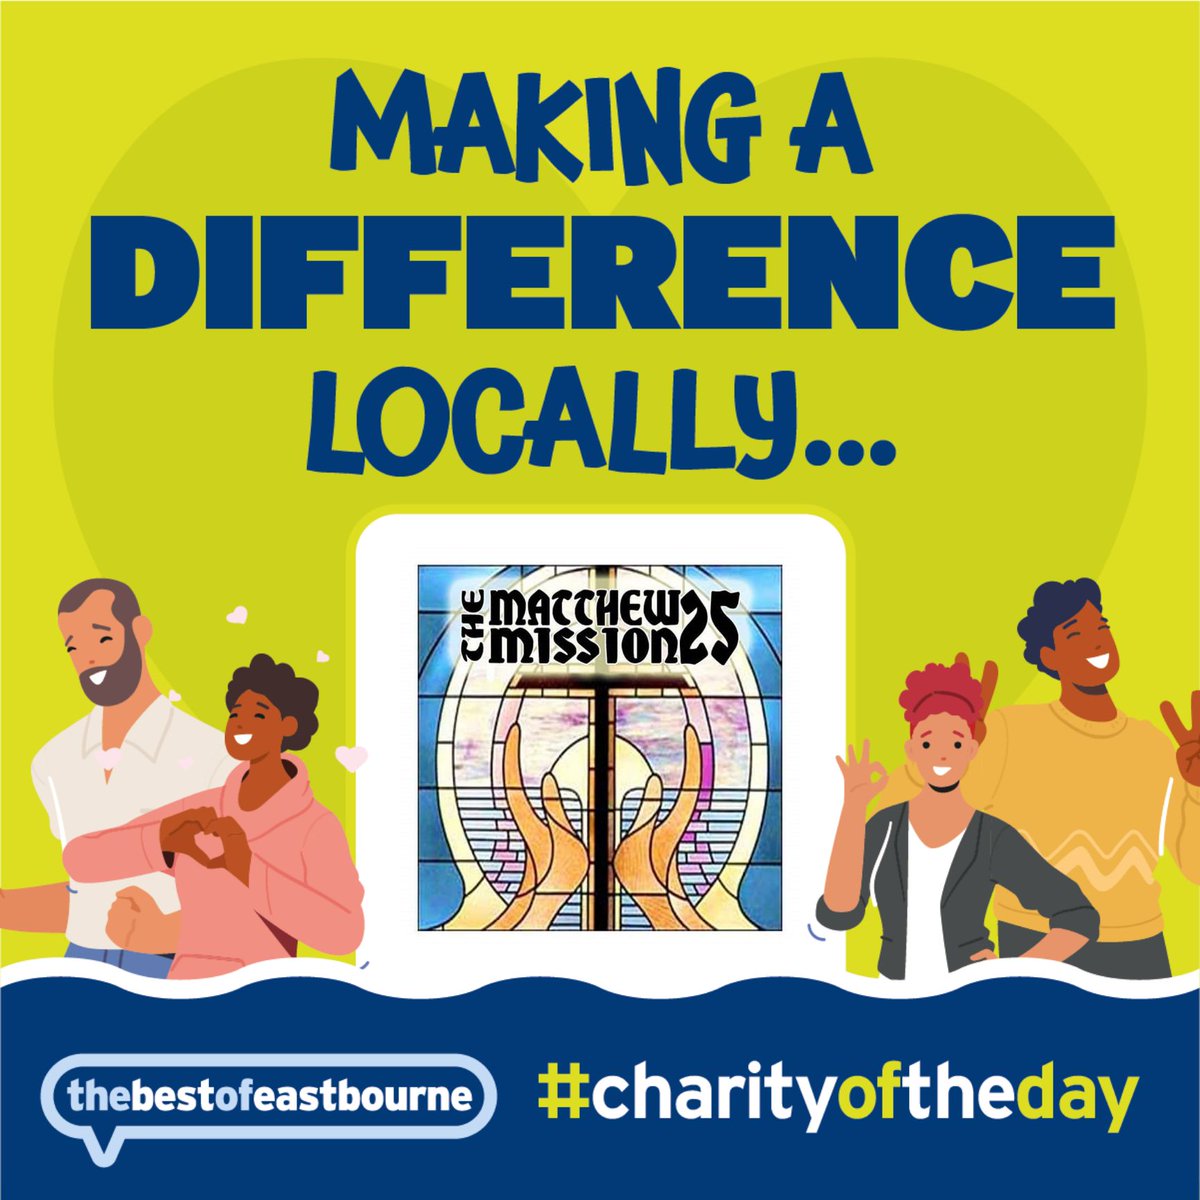 🤝 Making a difference locally 💙 Please show your support for The Matthew 25 Mission, you can find out more about this local charity in our Community Guide bit.ly/3SqBpG1 #BestOfEastbourne #CharityOfTheDay #EastbourneCharity #EBcharity #EastbourneVolunteer